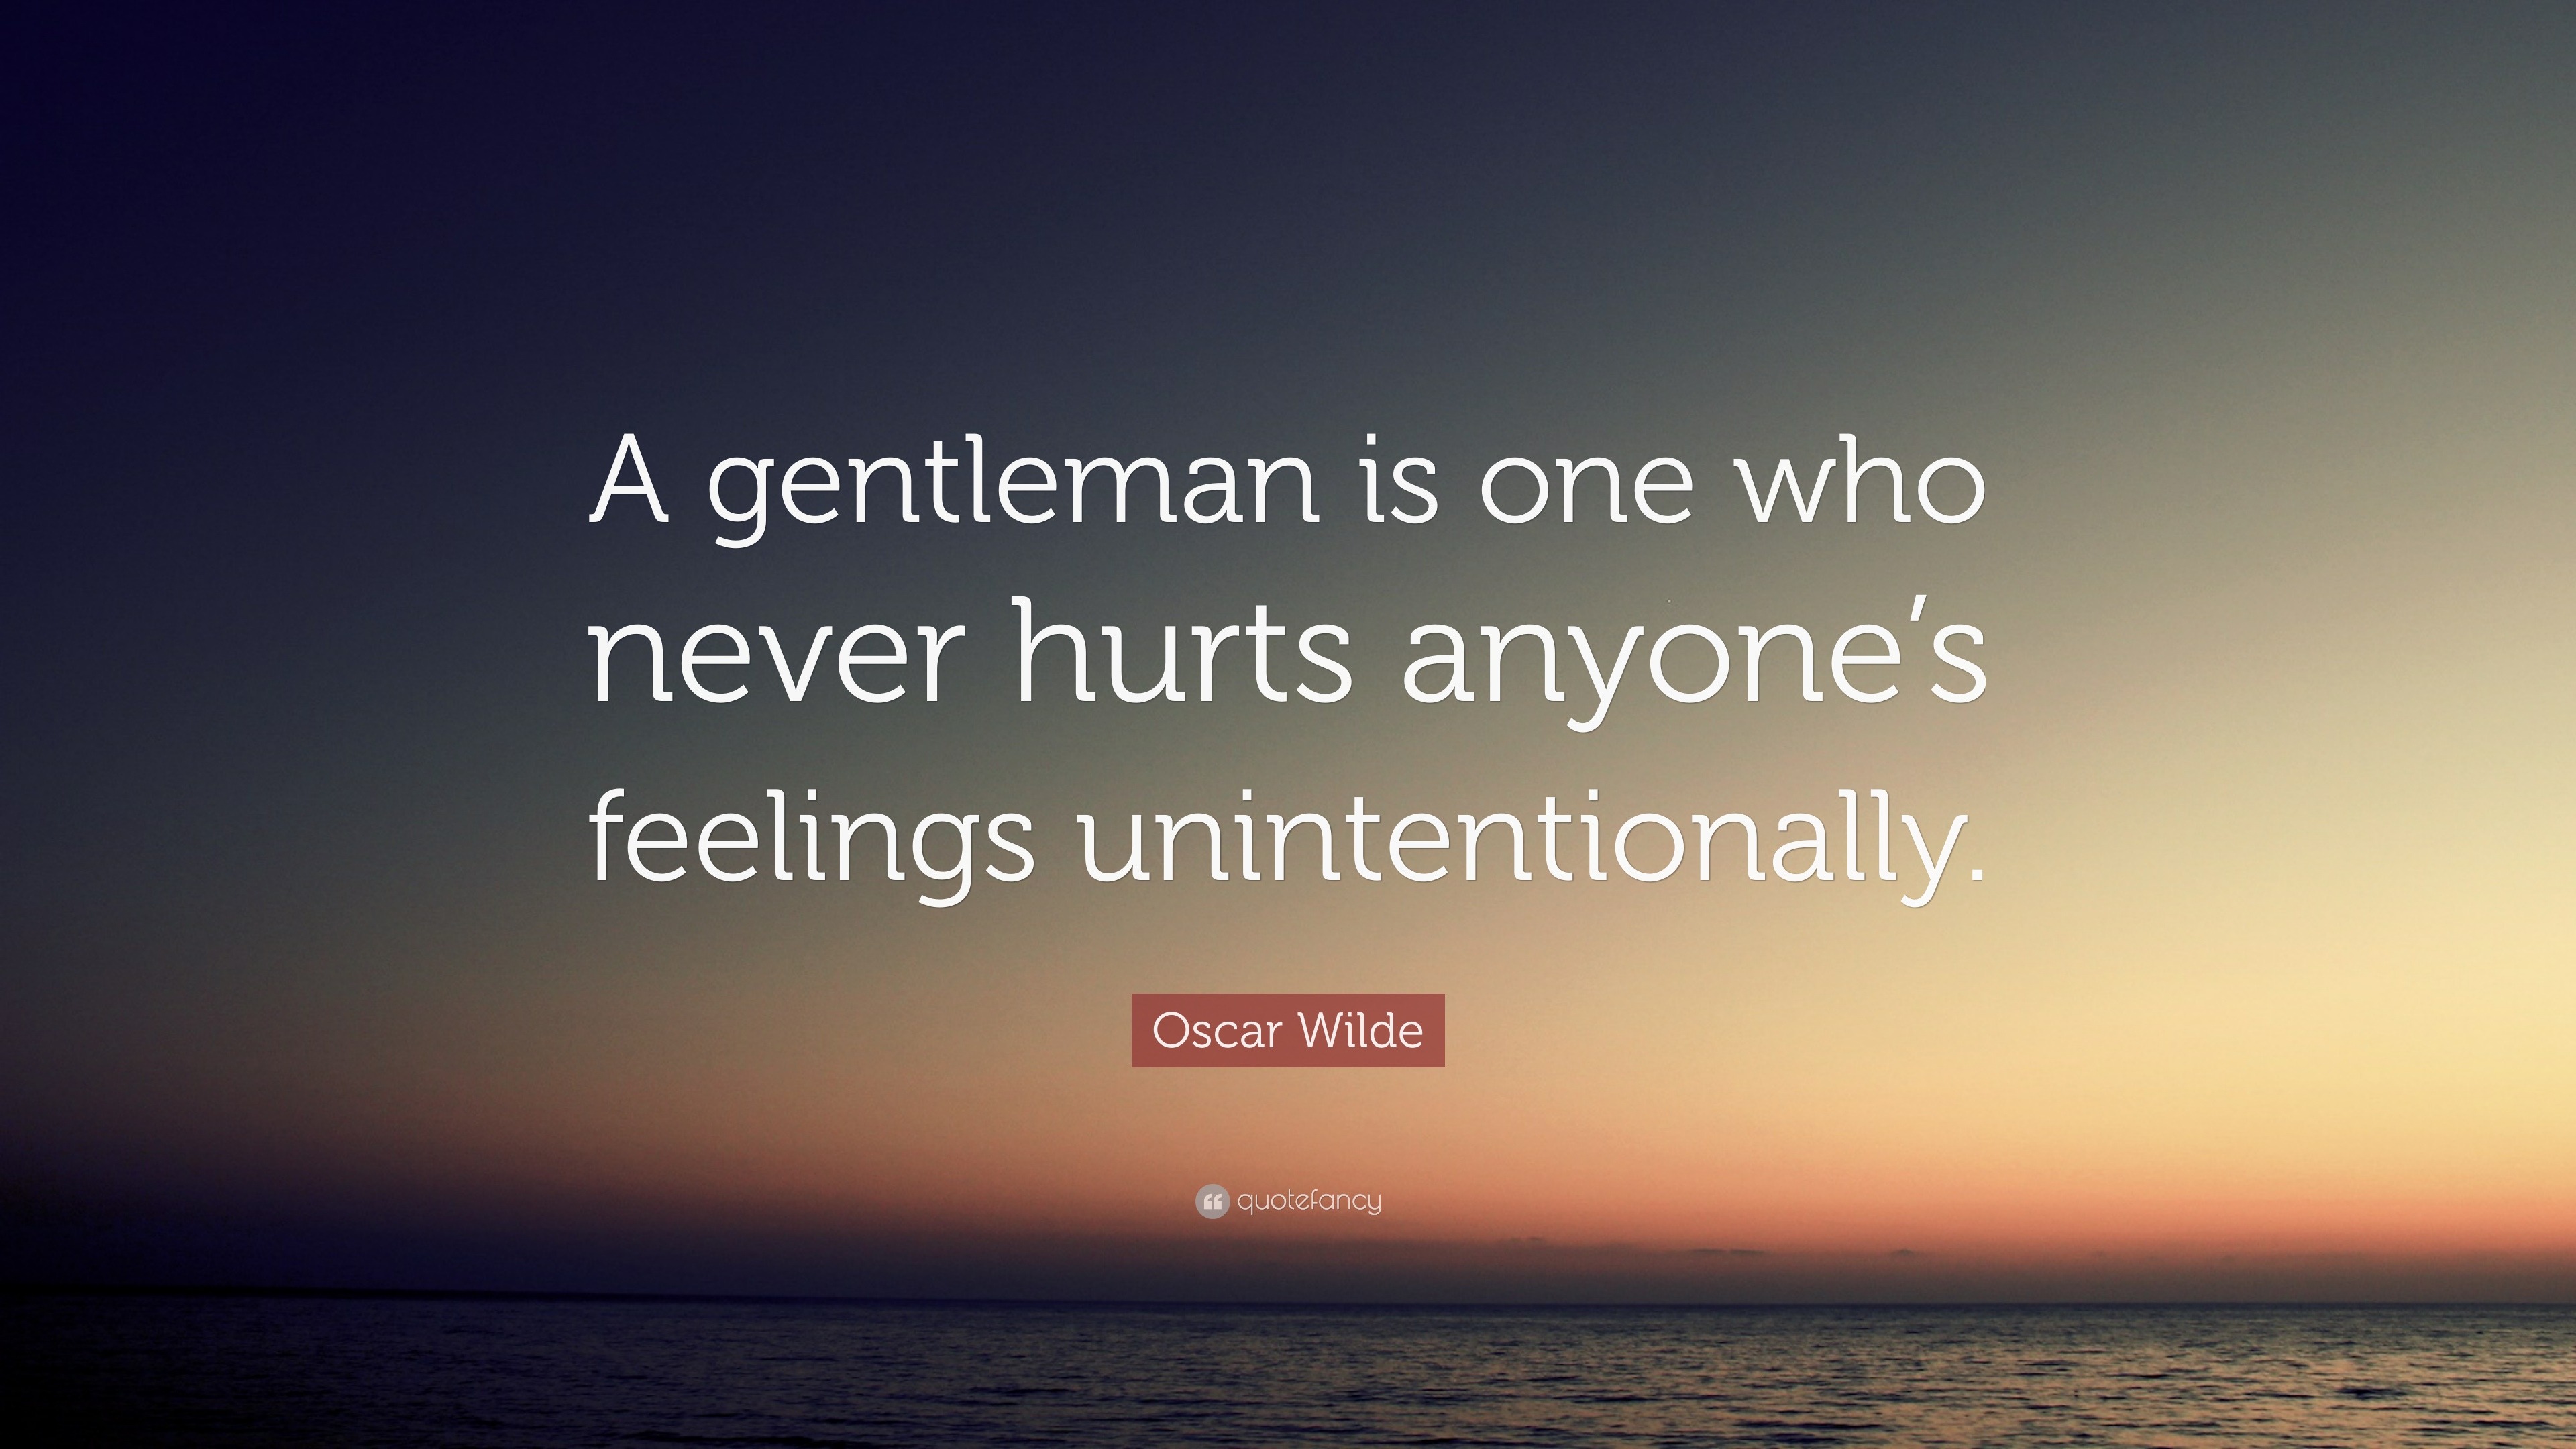 Oscar Wilde Quote “A gentleman is one who never hurts anyone s feelings unintentionally